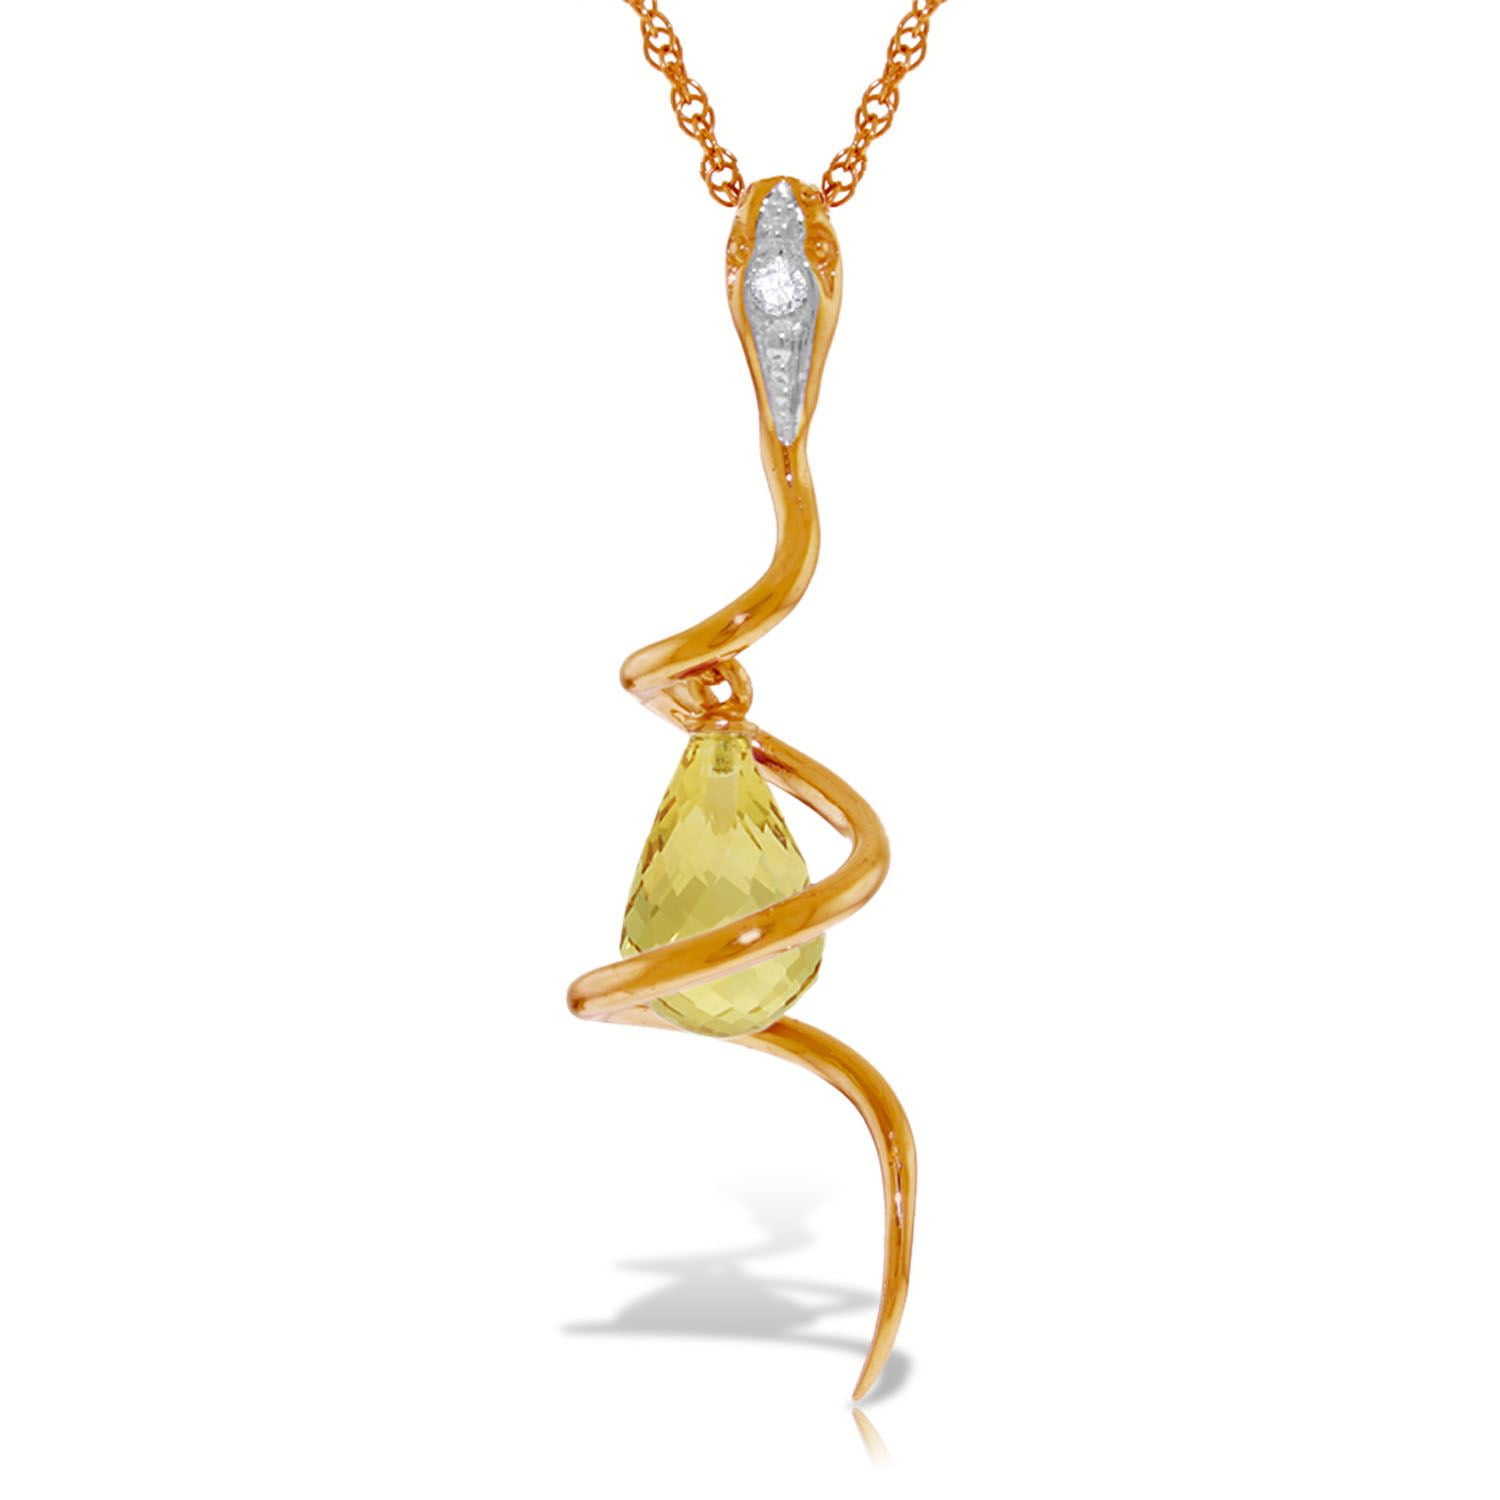 ALARRI 14K Solid Rose Gold Heart Necklace w/ Natural Citrine with 22 Inch Chain Length 